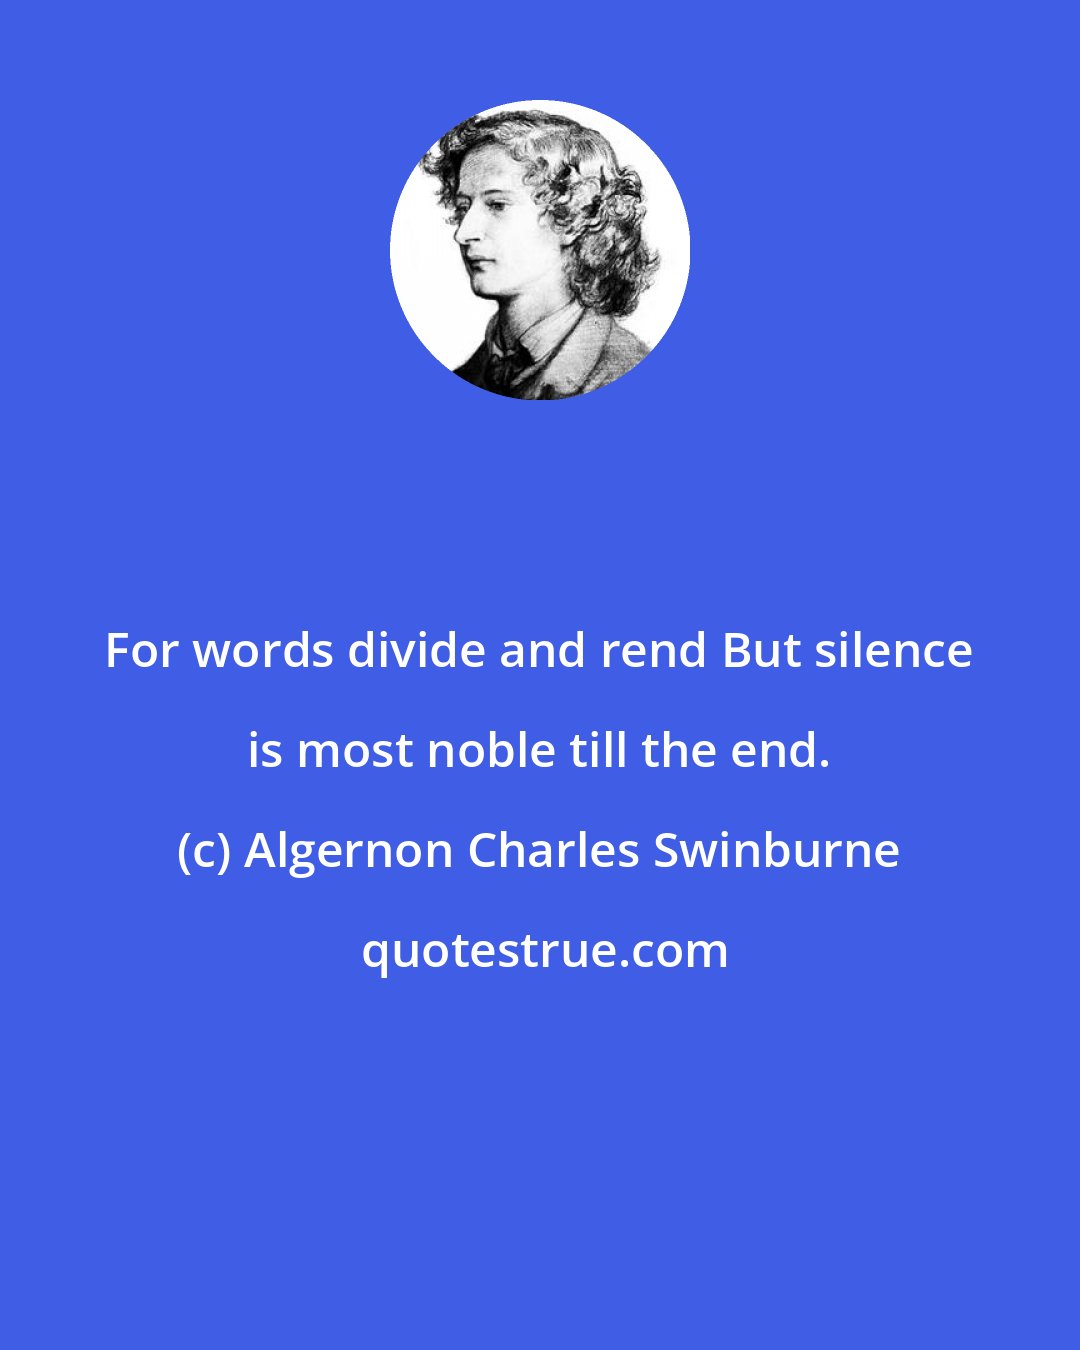 Algernon Charles Swinburne: For words divide and rend But silence is most noble till the end.